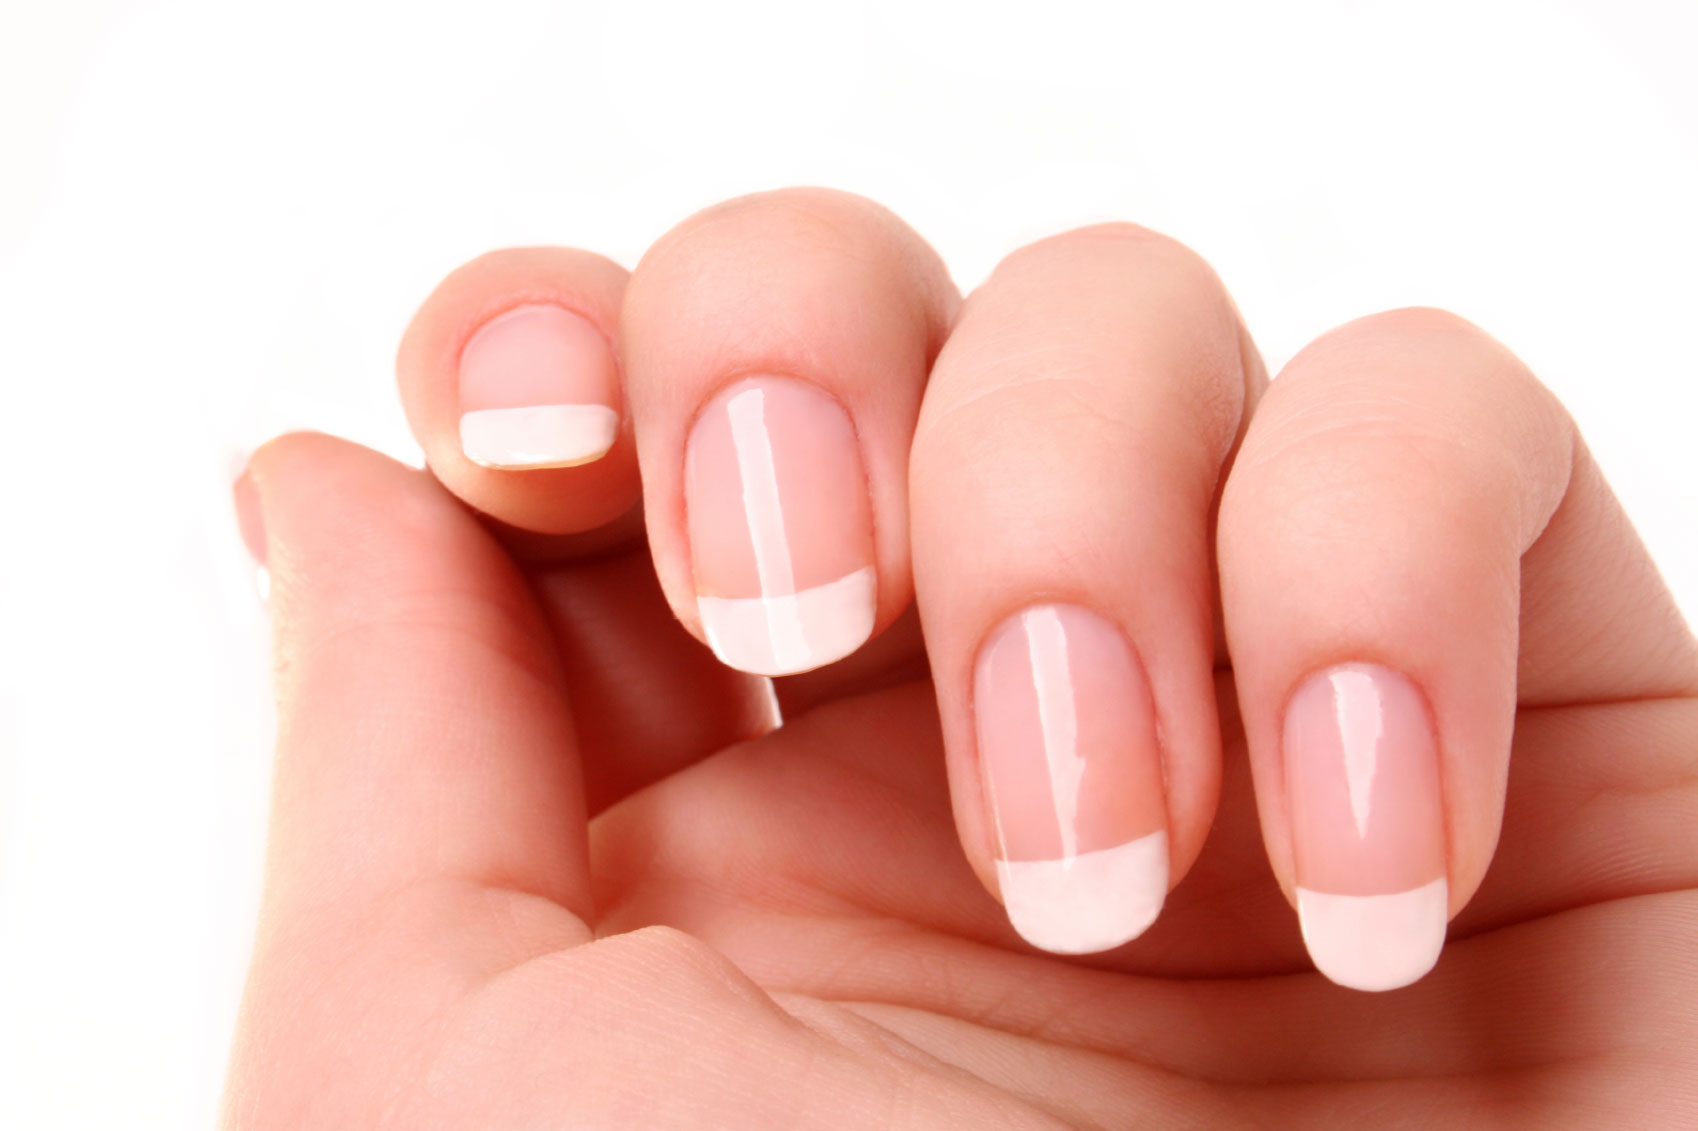 No time for a manicure? No problem. Just buff your nails with a soft brush and some toothpaste.